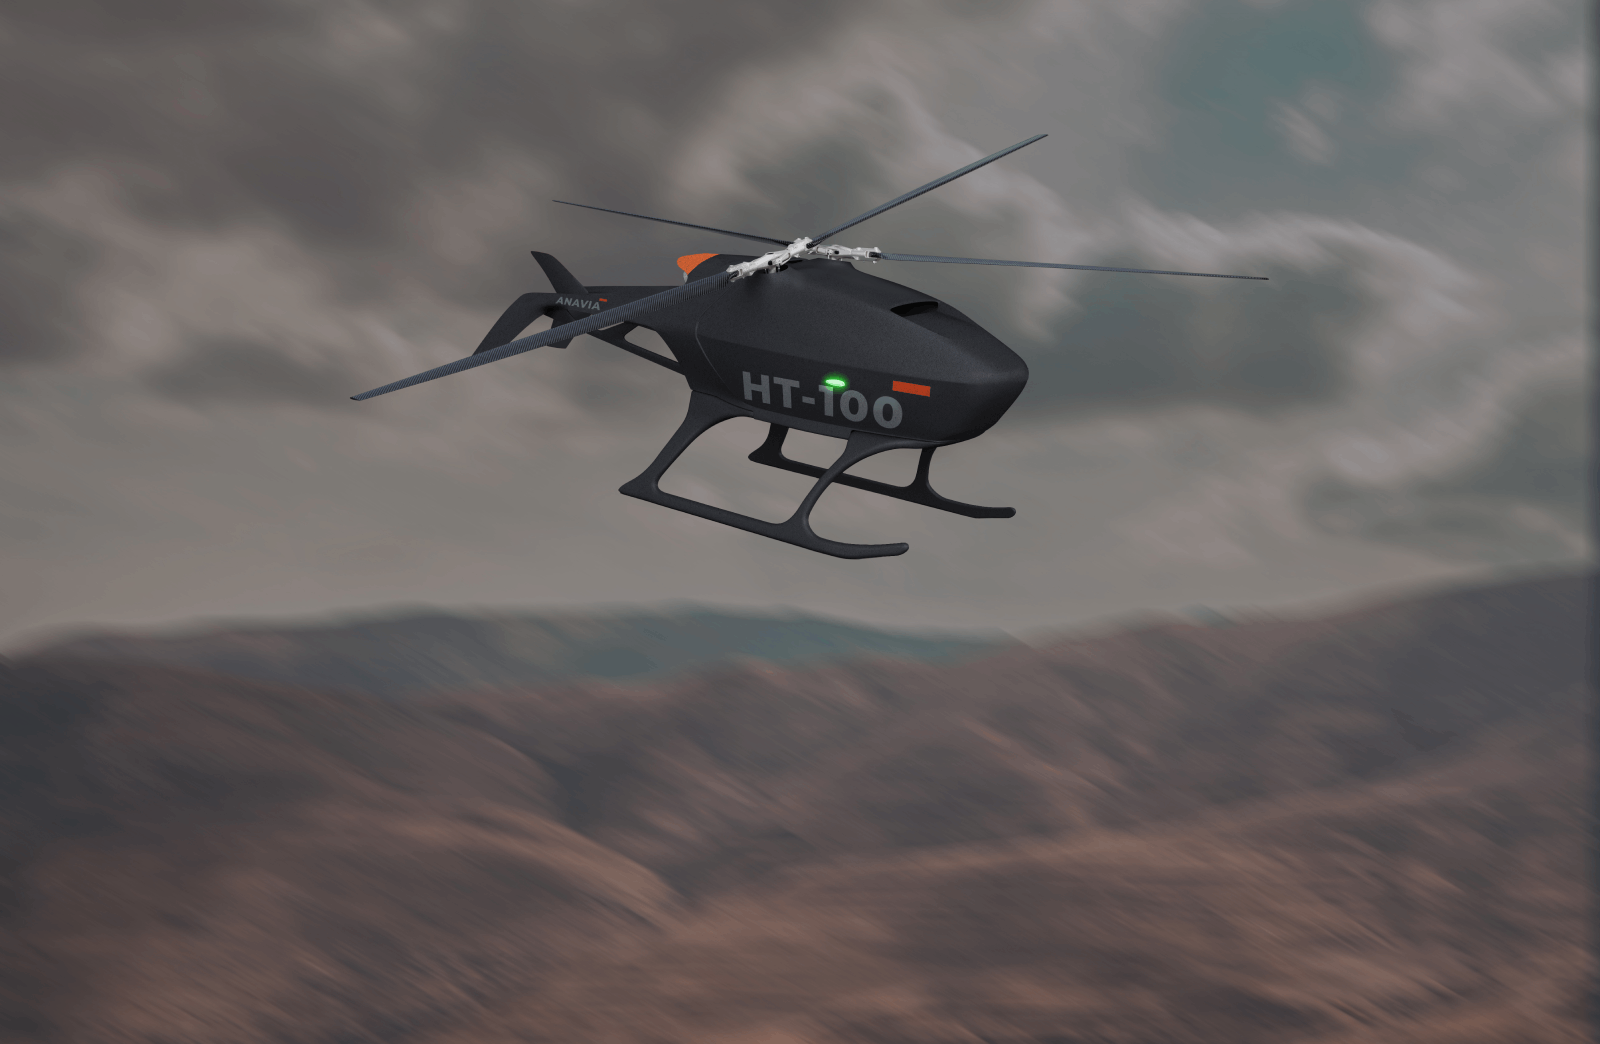 EDGE Expands Global VTOL Capabilities with First Major Sale of HT-100 Unmanned Helicopters